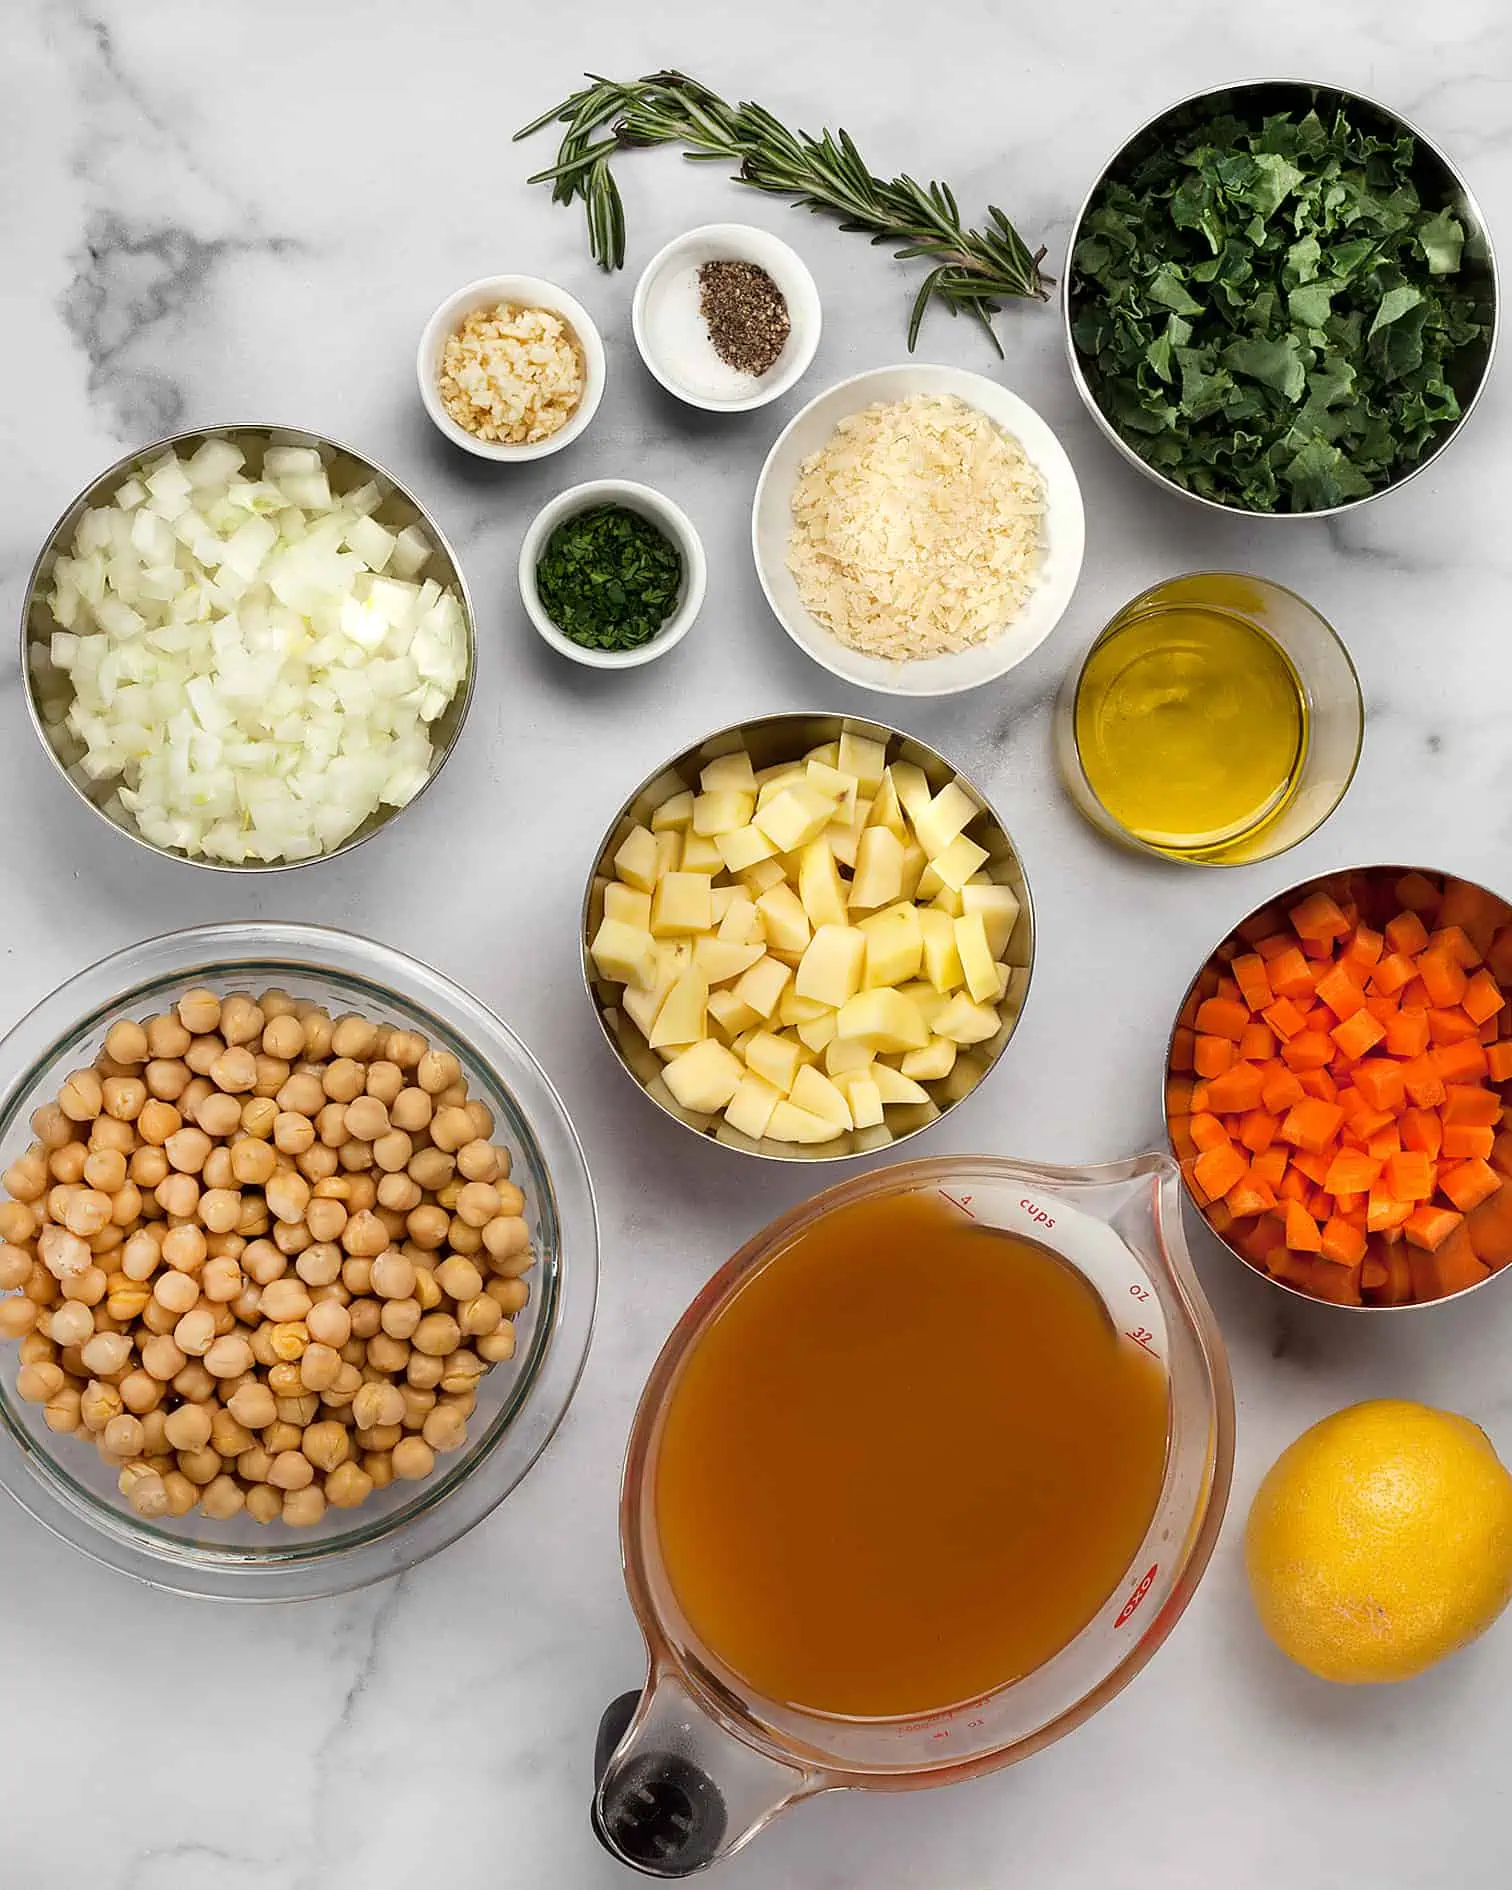 Ingredients including chickpeas, carrots, potatoes, kale, vegetable broth, onions, garlic and rosemary.